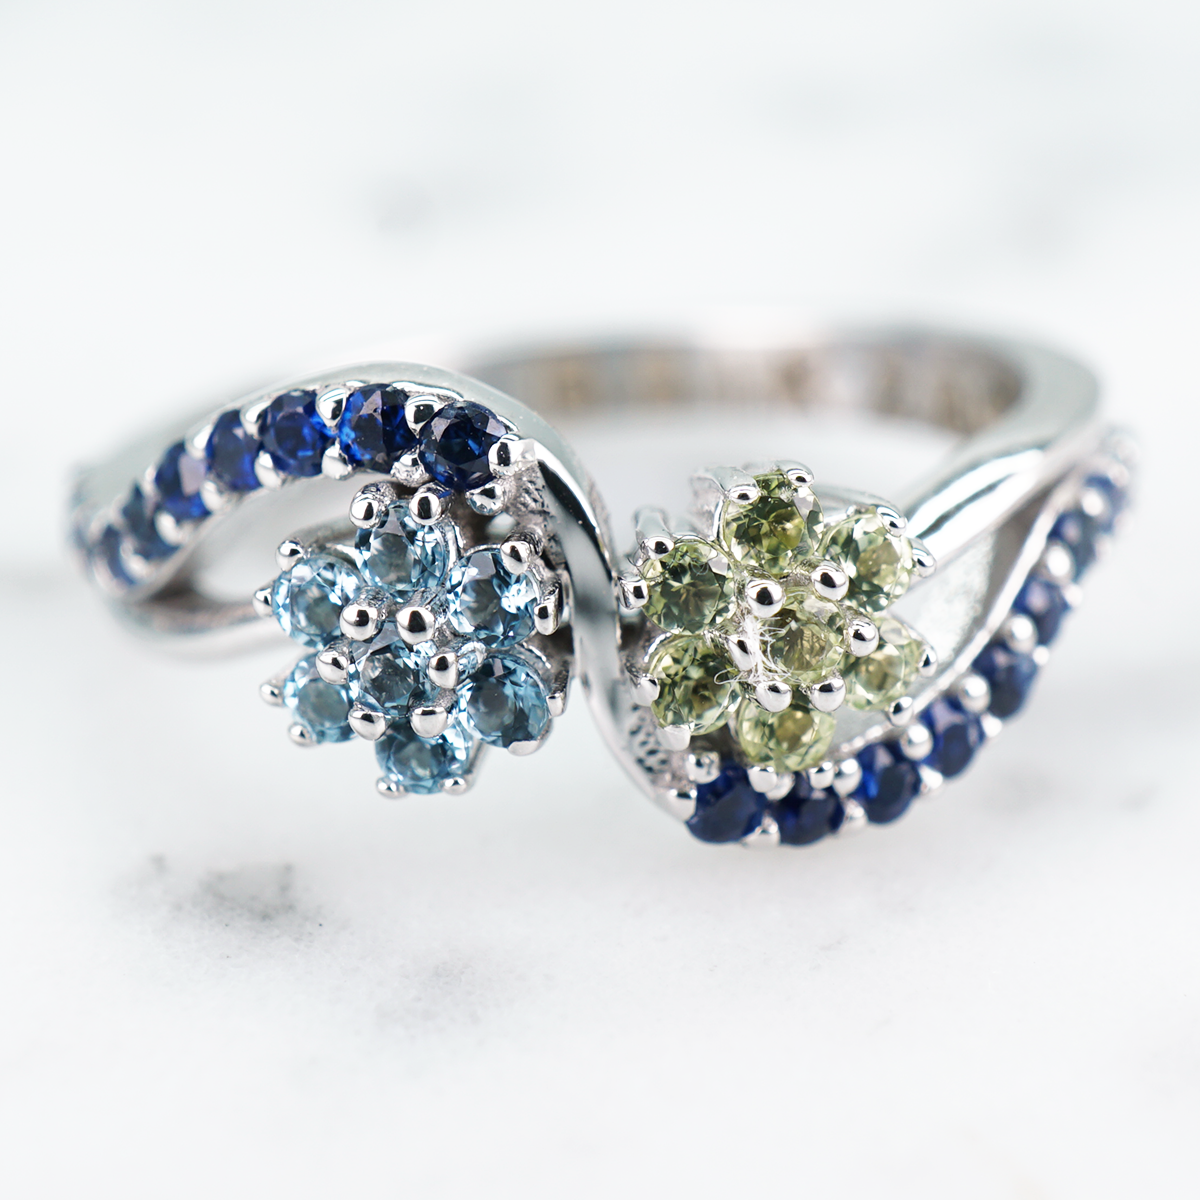 Simple Floral Pave Prabadara Peridot Ring with Aquamarine & Blue Sapphire in 14k White Gold